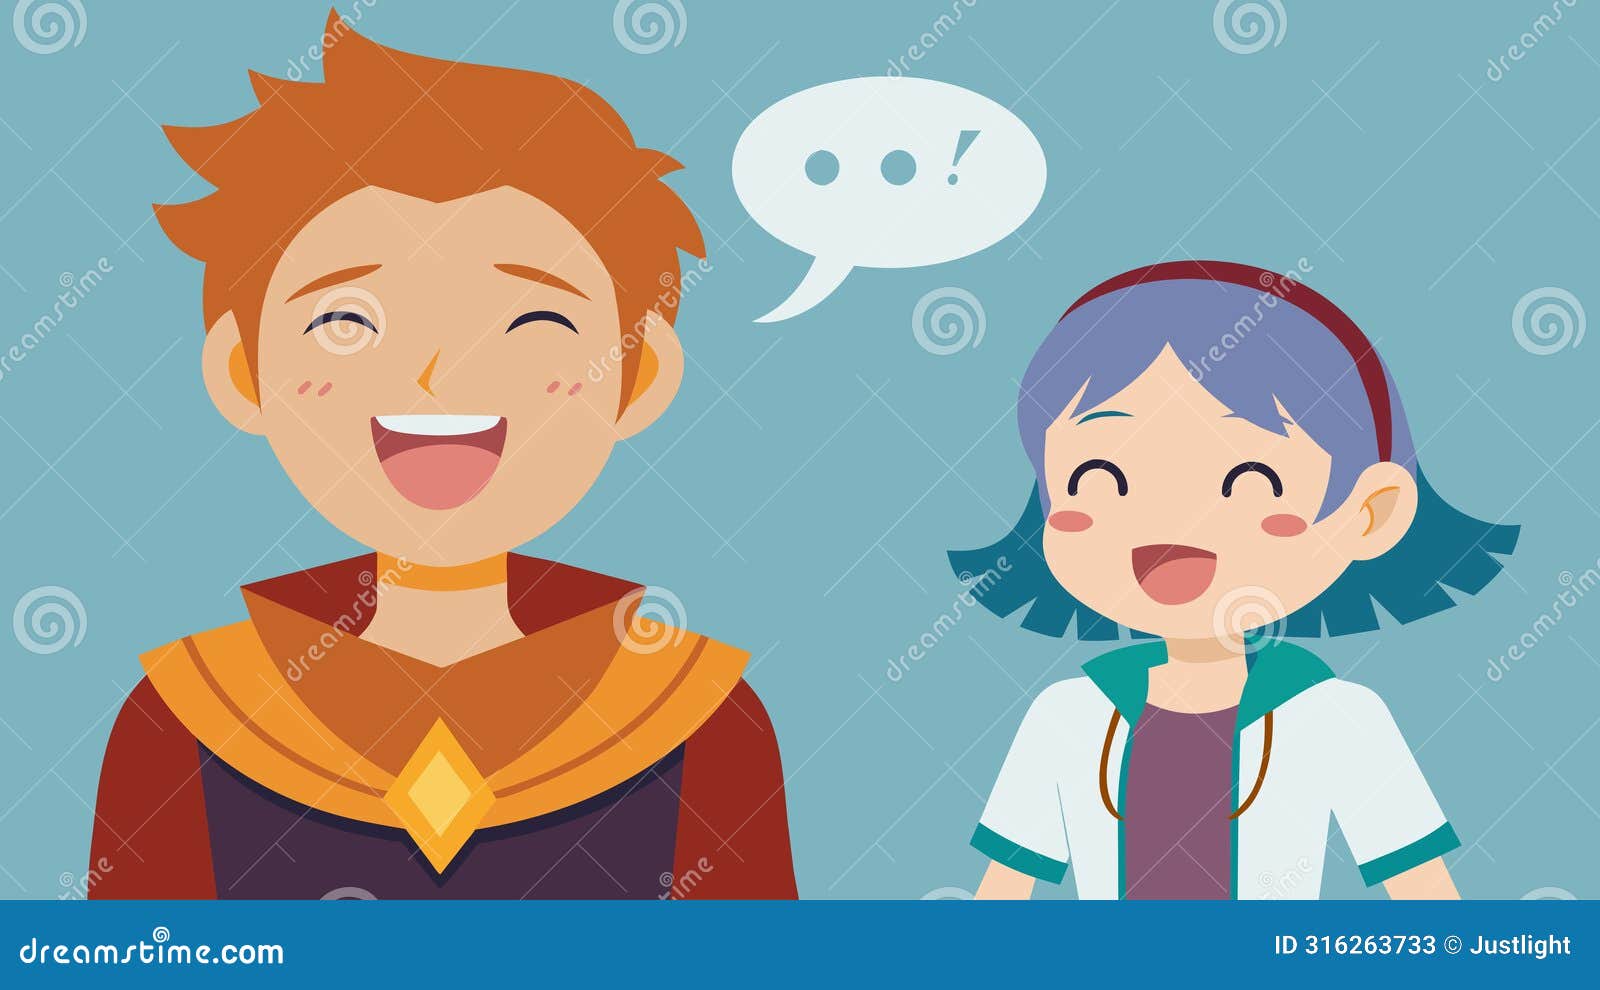 a young cosplayer excitedly tells an older cosplayer that they were inspired to attend the convention and cosplay for